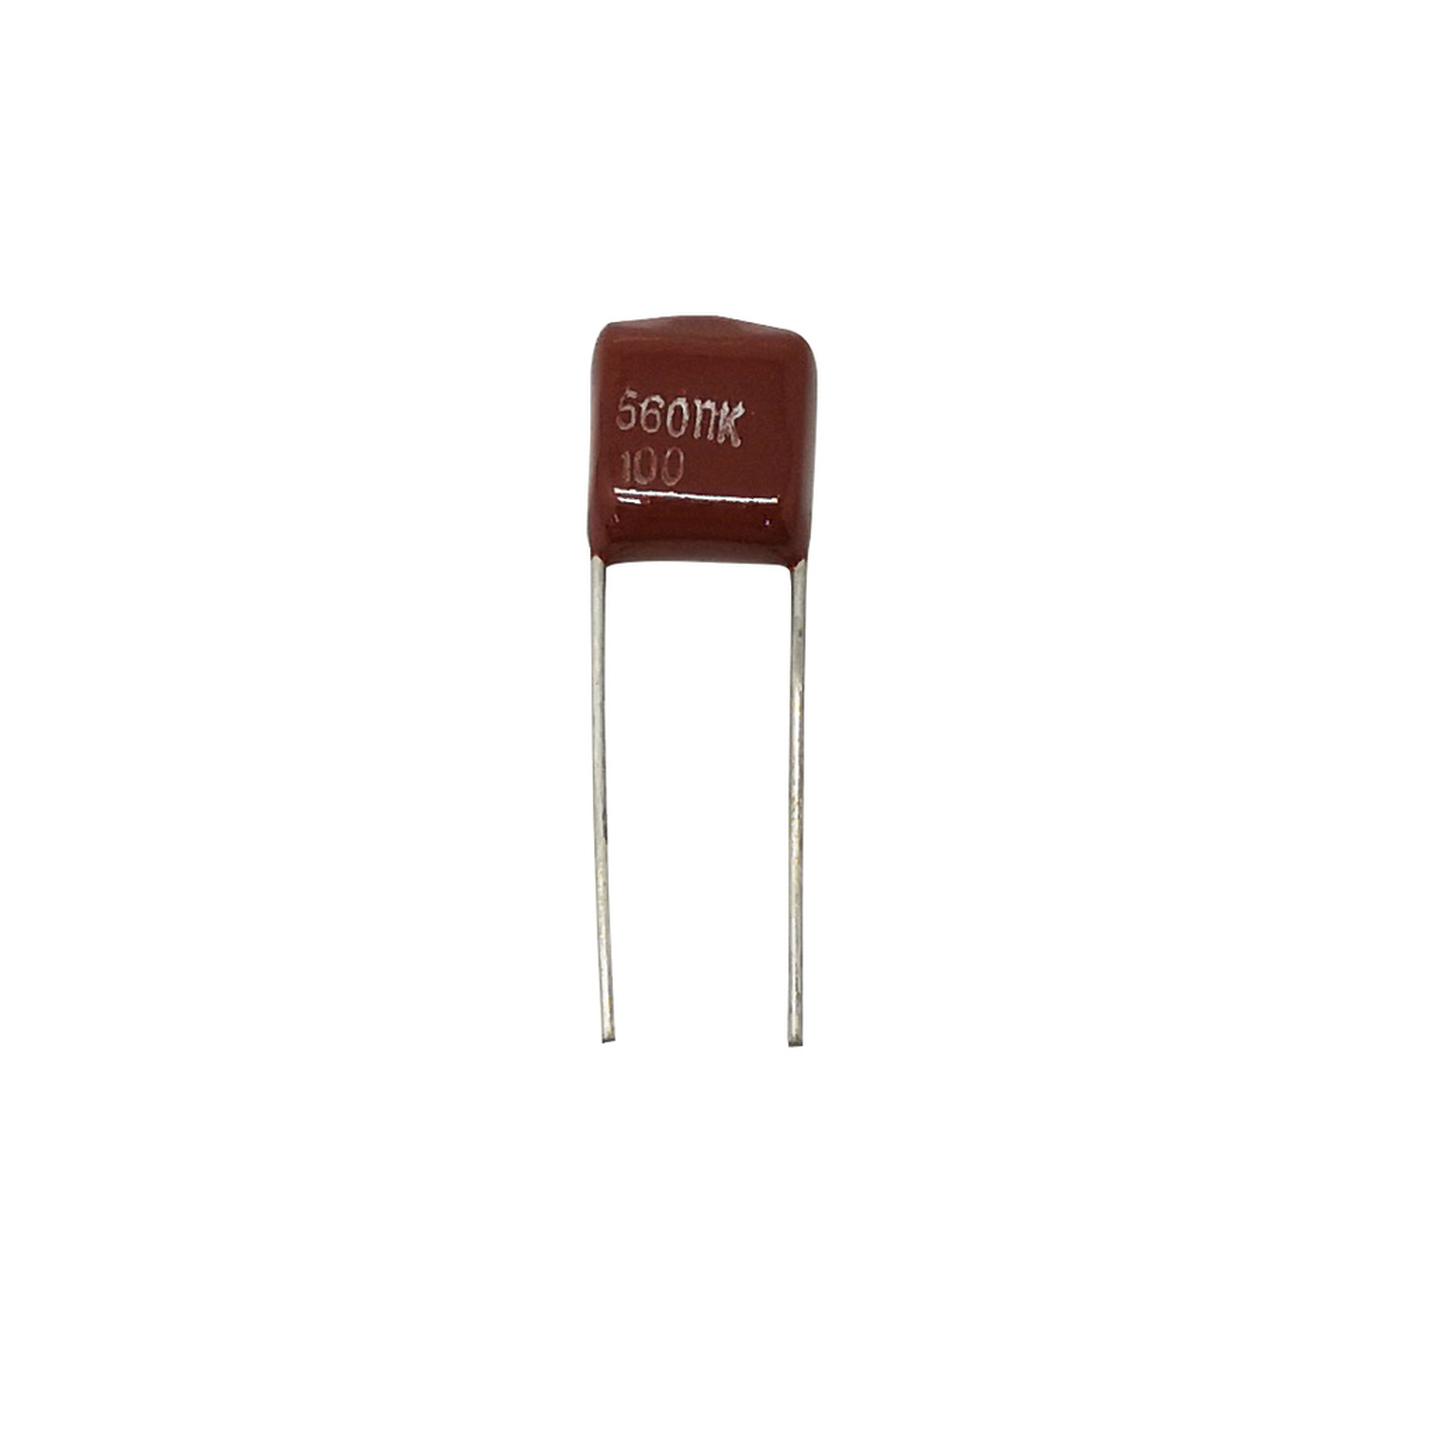 560nF 100VDC Polyester Capacitor